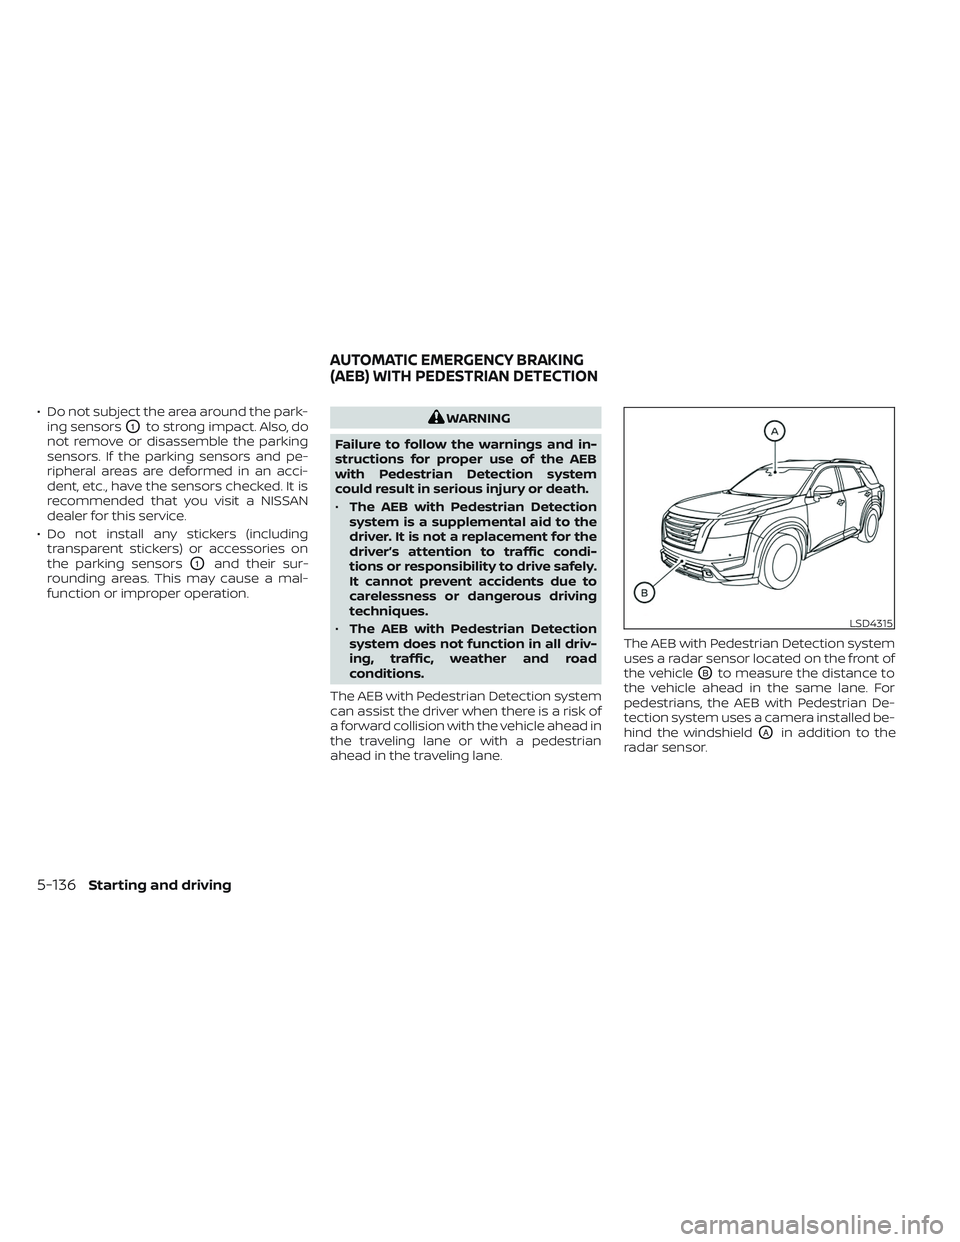 NISSAN PATHFINDER 2022  Owner´s Manual • Do not subject the area around the park-ing sensors
O1to strong impact. Also, do
not remove or disassemble the parking
sensors. If the parking sensors and pe-
ripheral areas are deformed in an acc